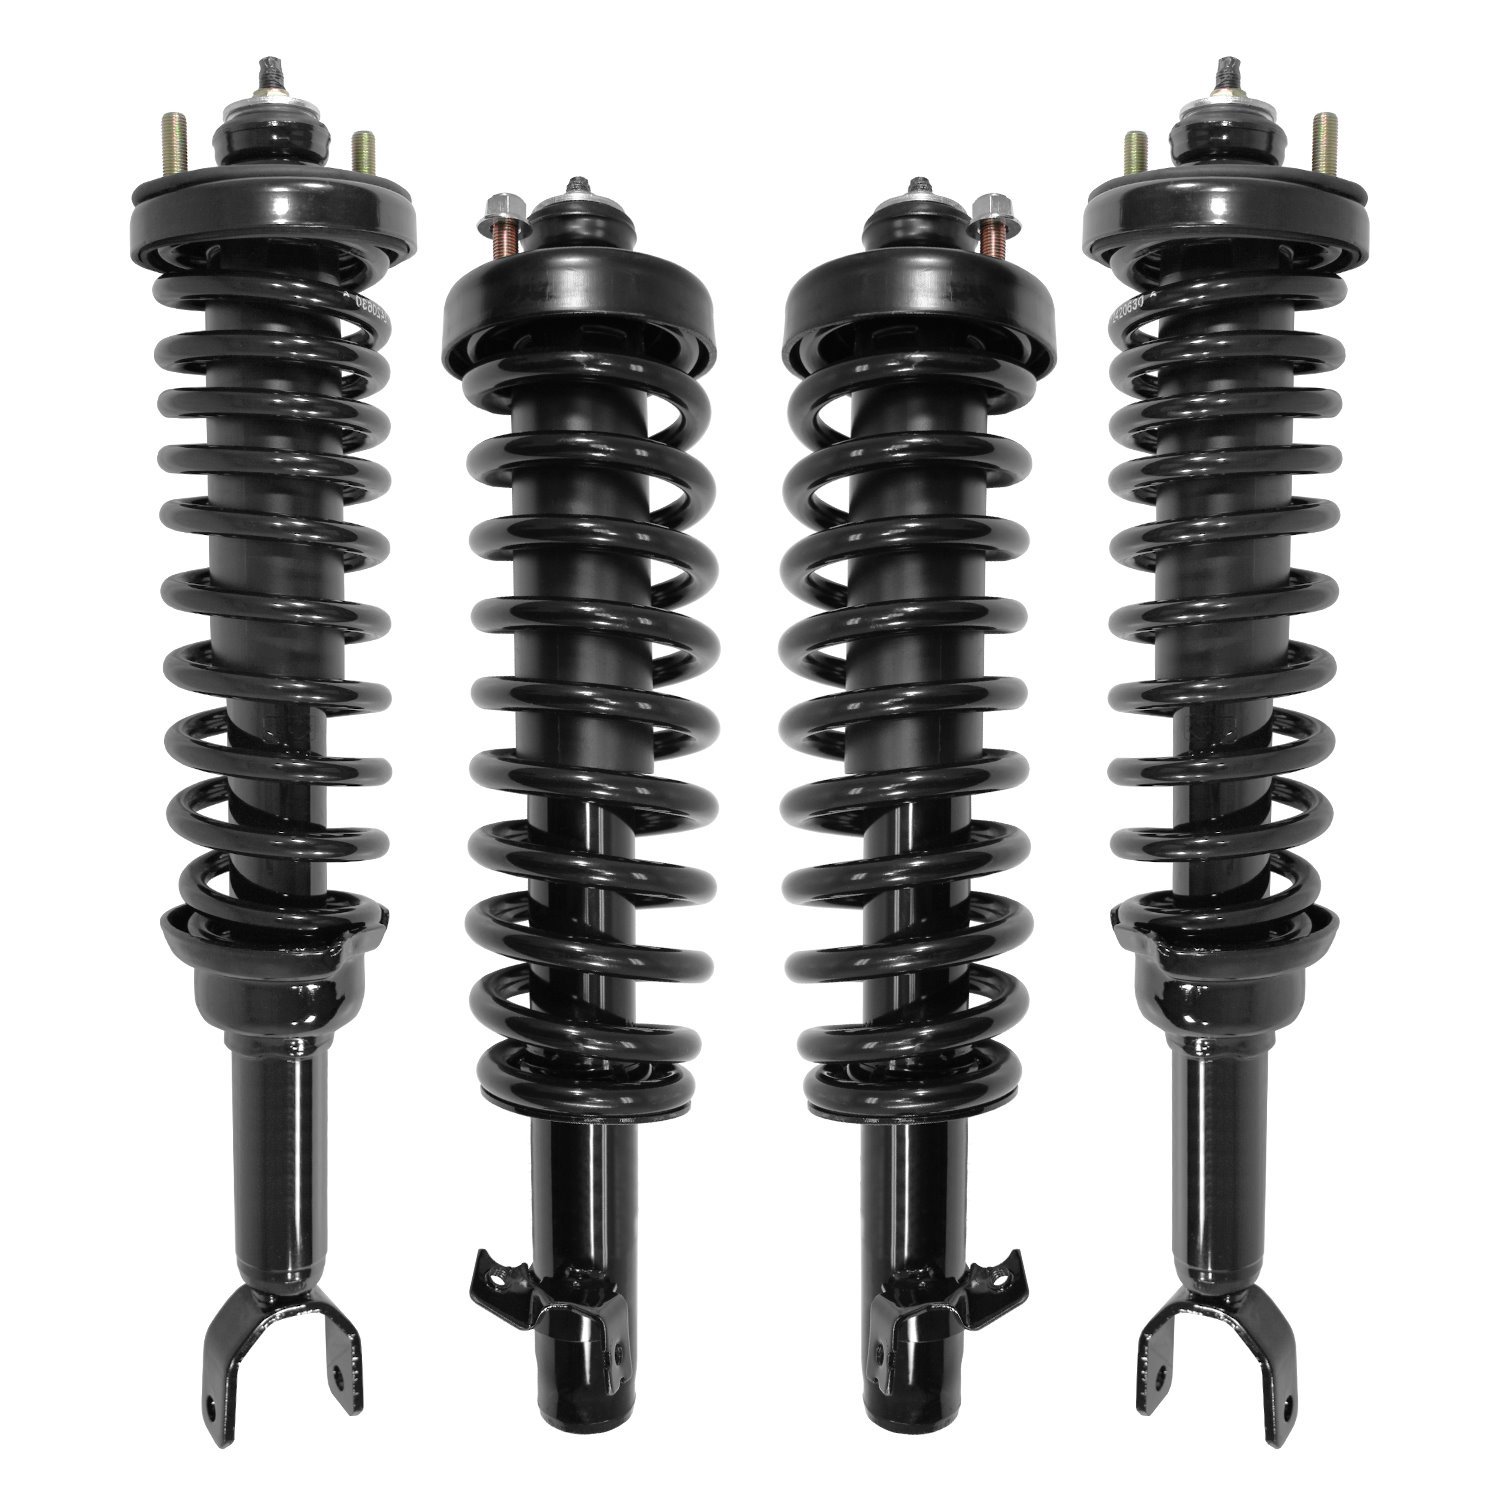 4-11541-15330-001 Front & Rear Suspension Strut & Coil Spring Assembly Kit Fits Select Acura Integra, Honda Civic